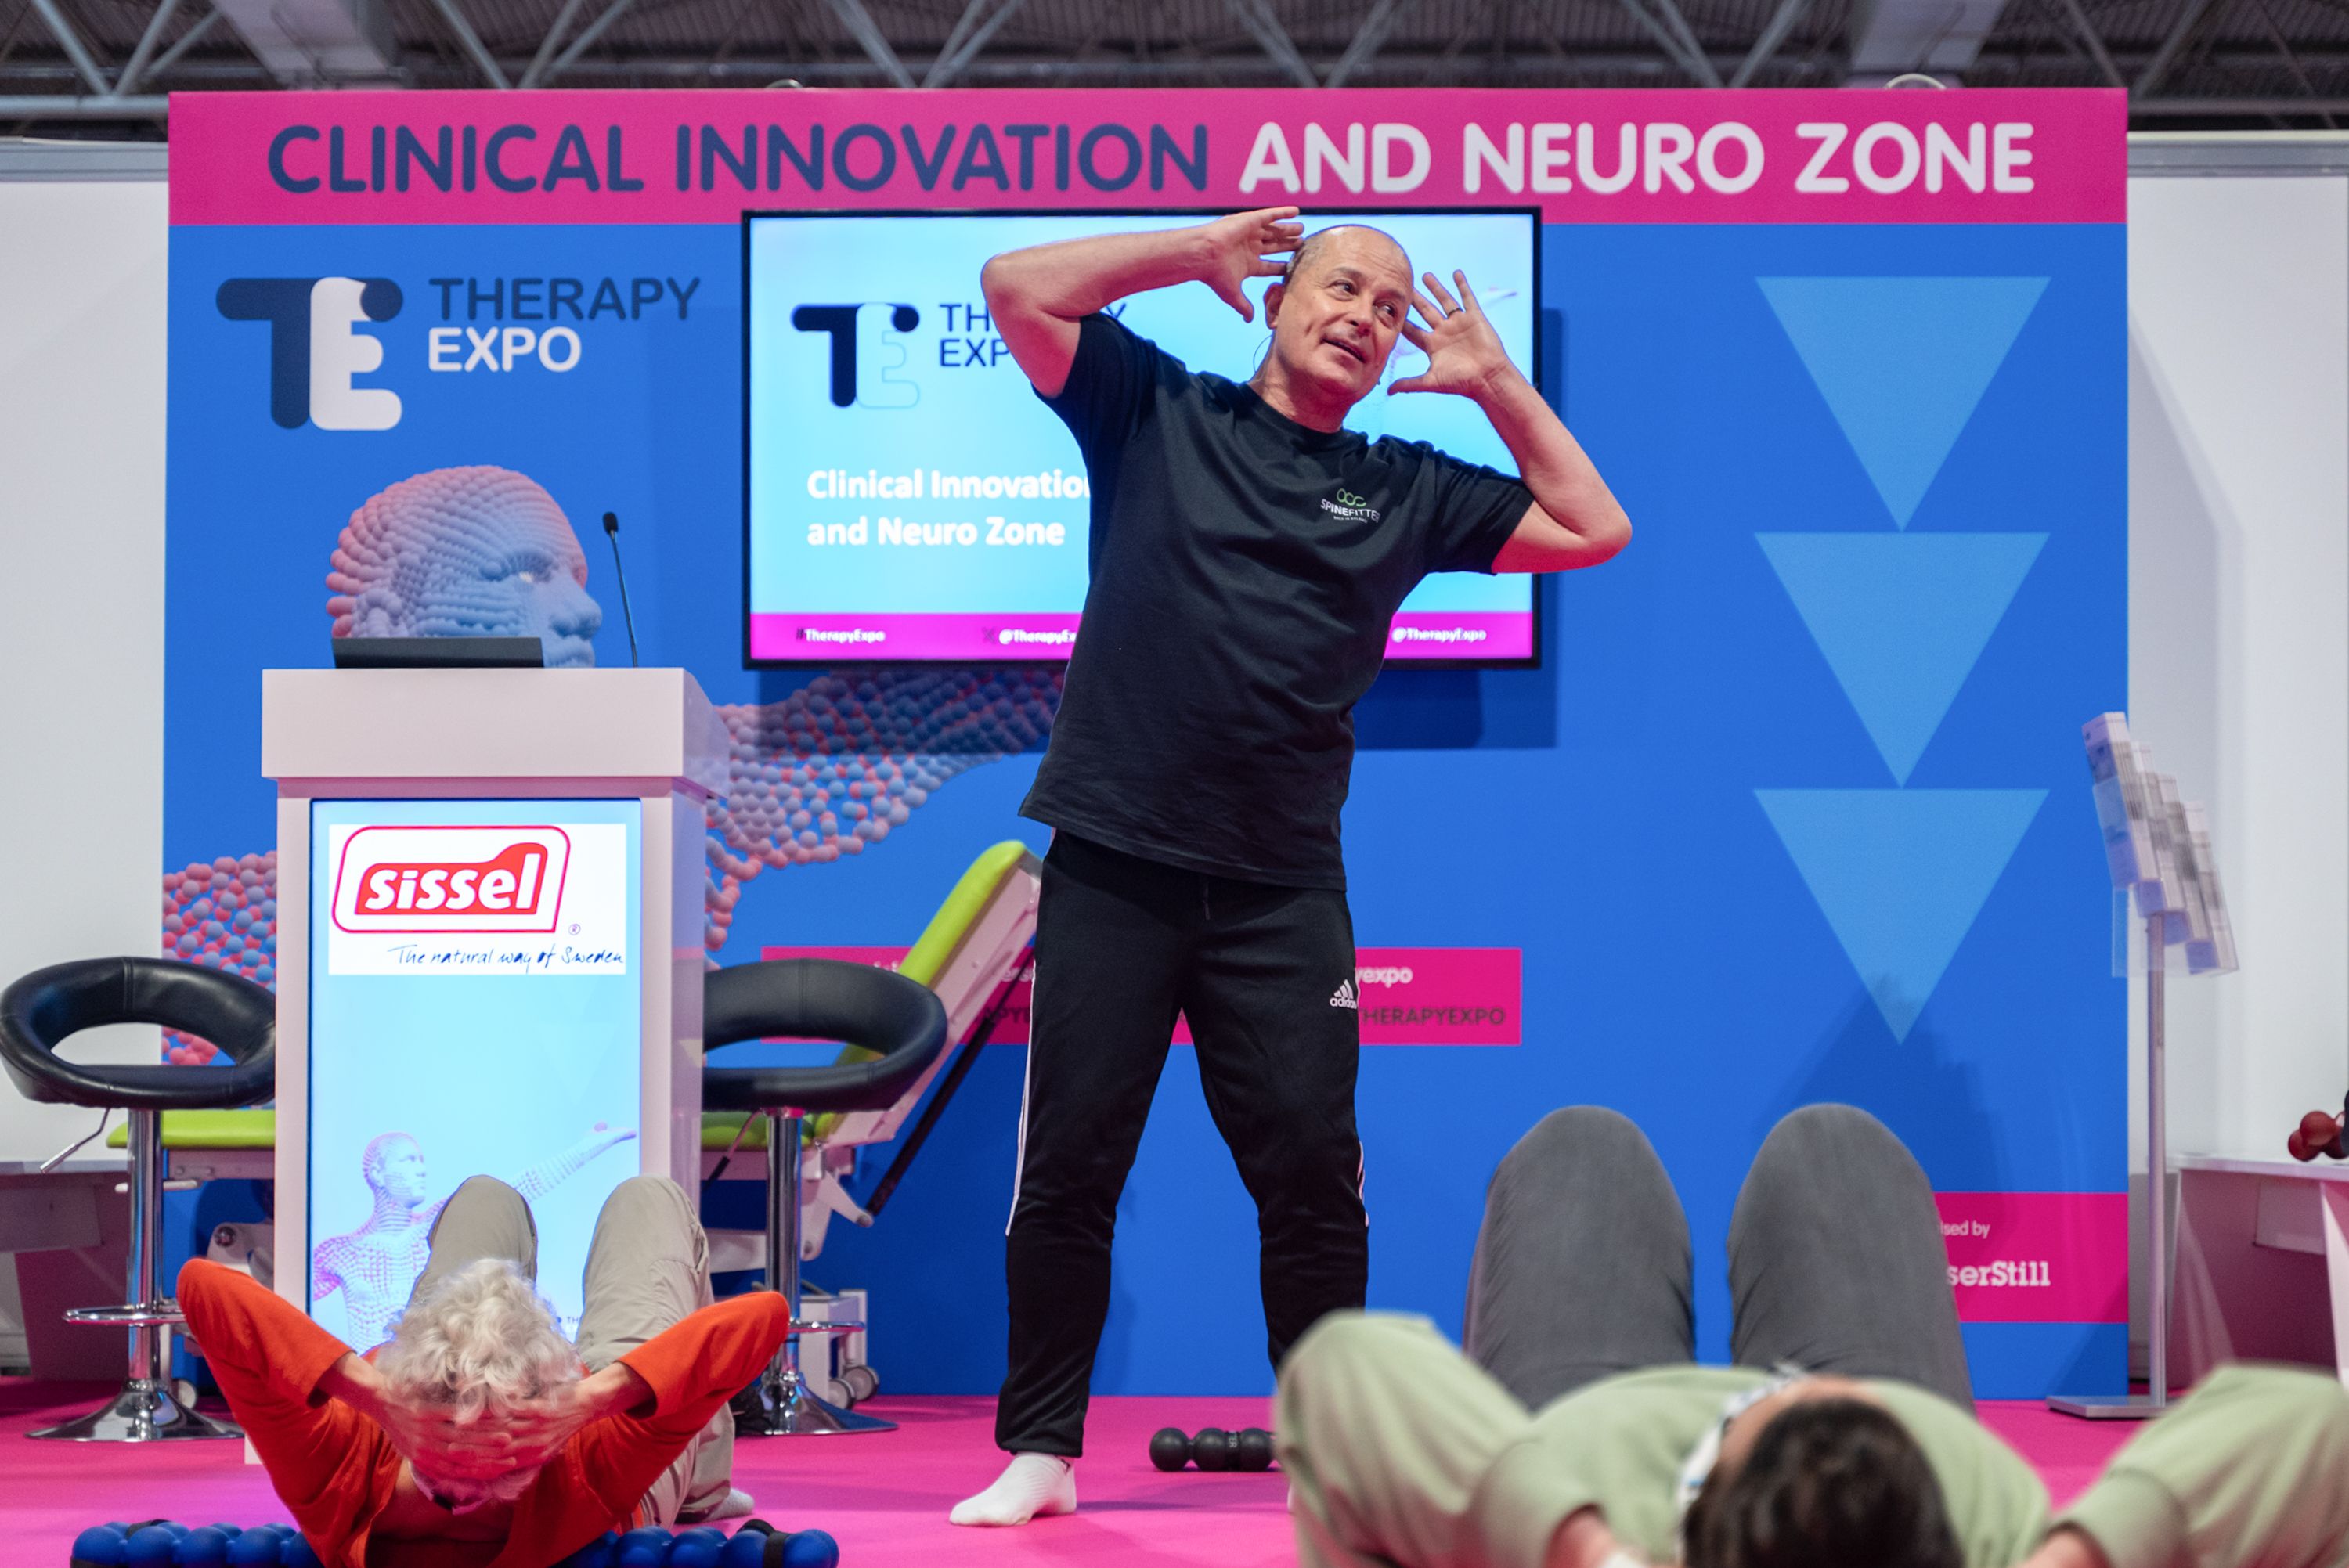 Clinical innovation and Neuro Zone